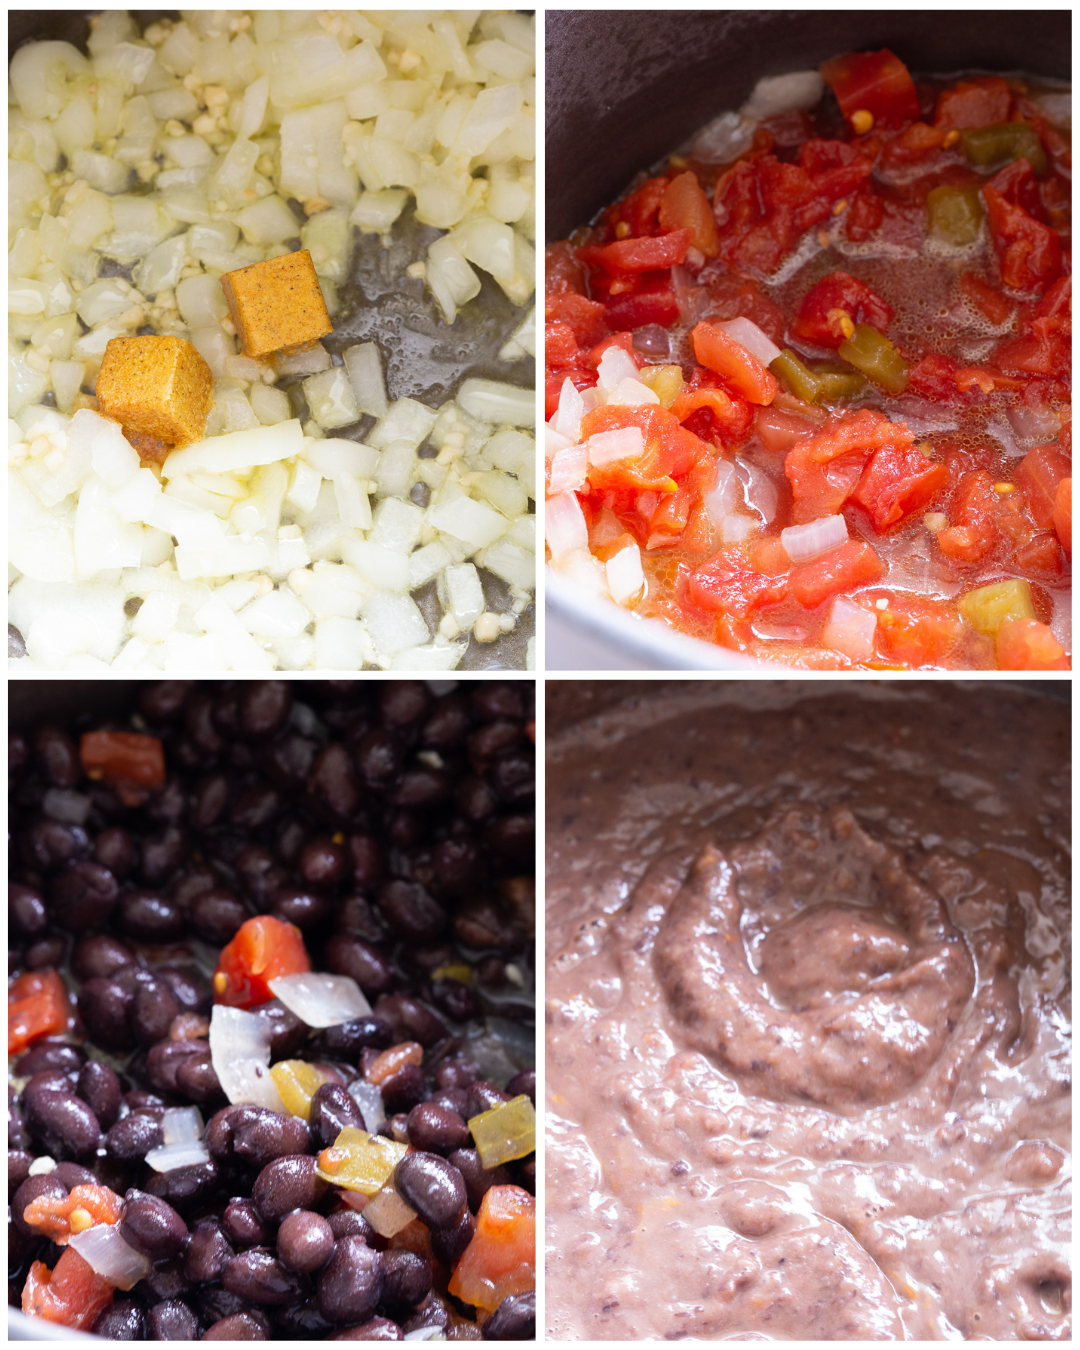 How to make the black beans. 